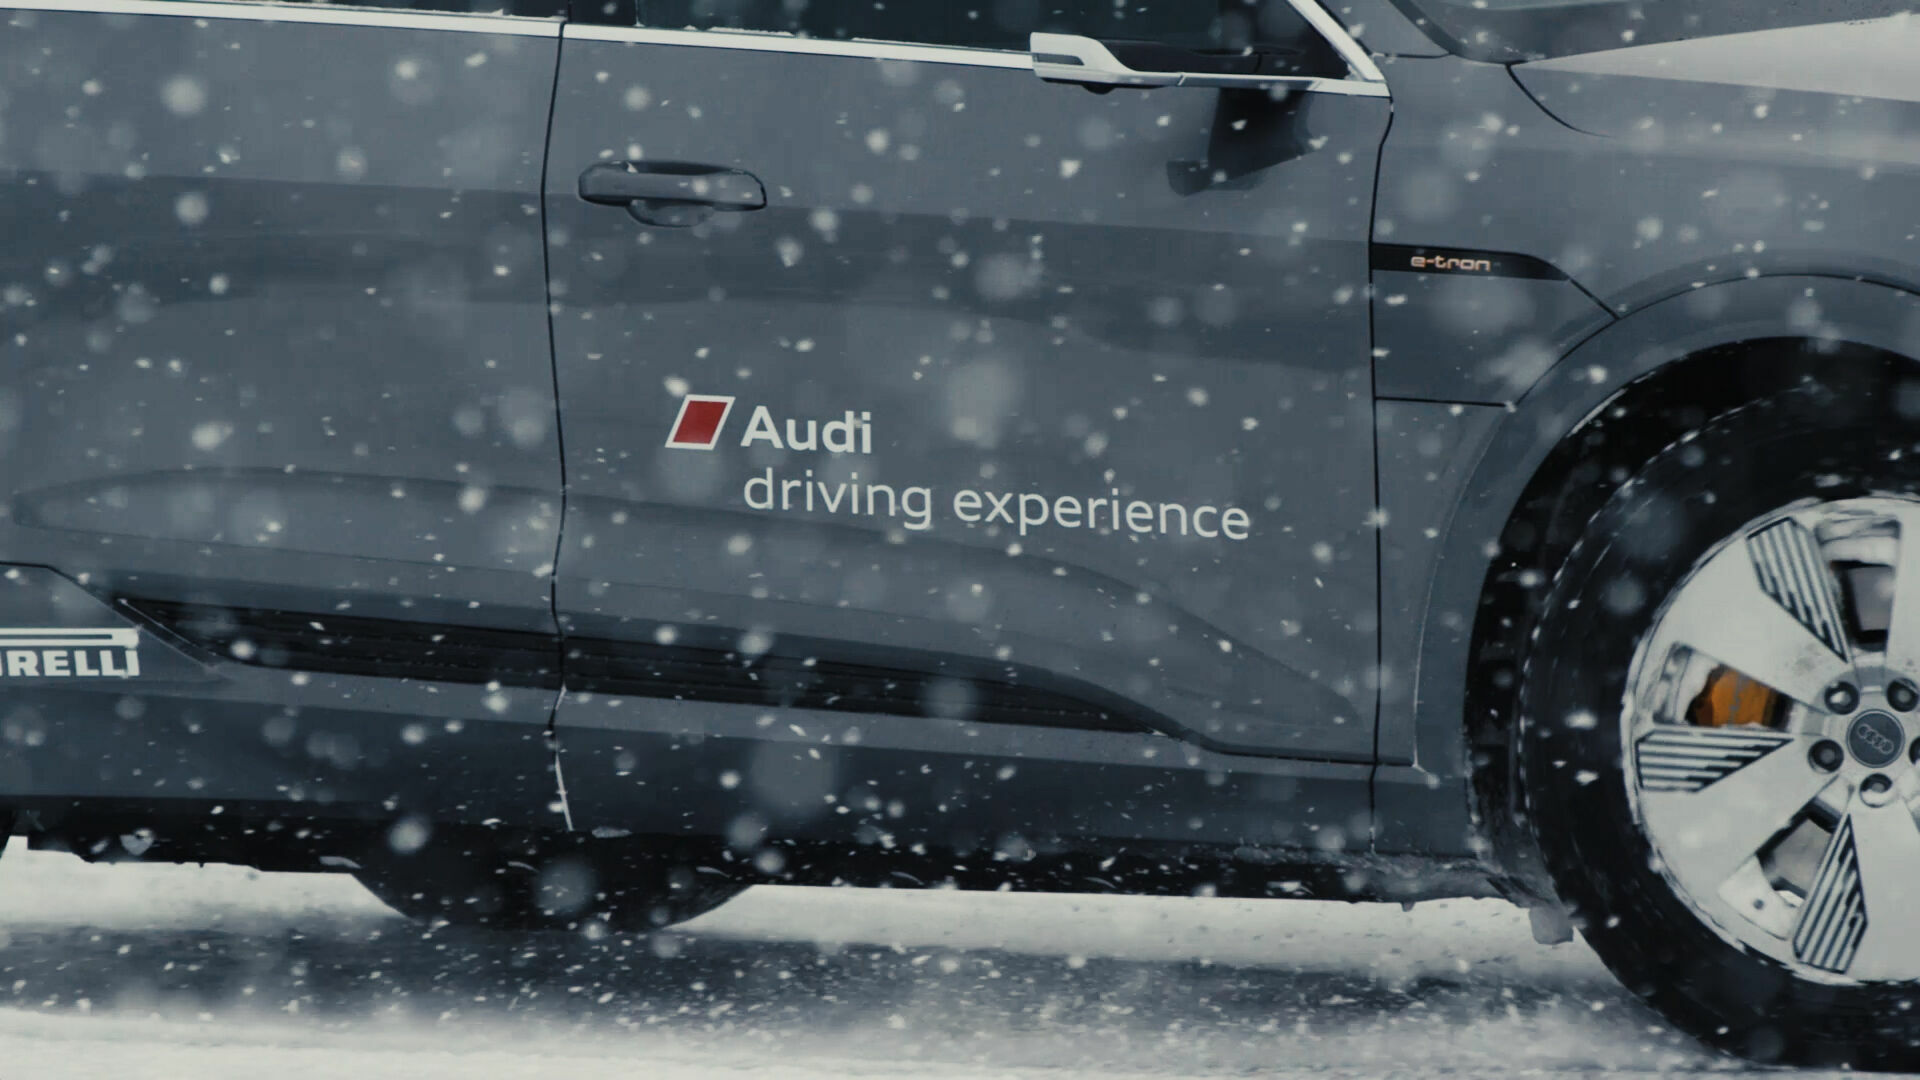 Audi e-tron on snow and ice: Audi driving experience in Sweden